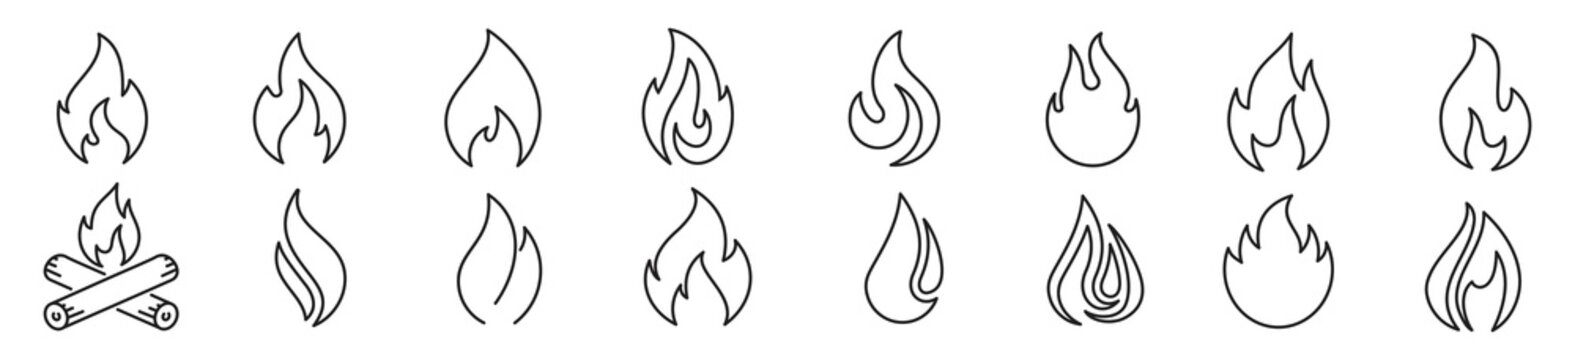 fire flat line icons, flames, flame of various shapes, bonfire vector illustration, 